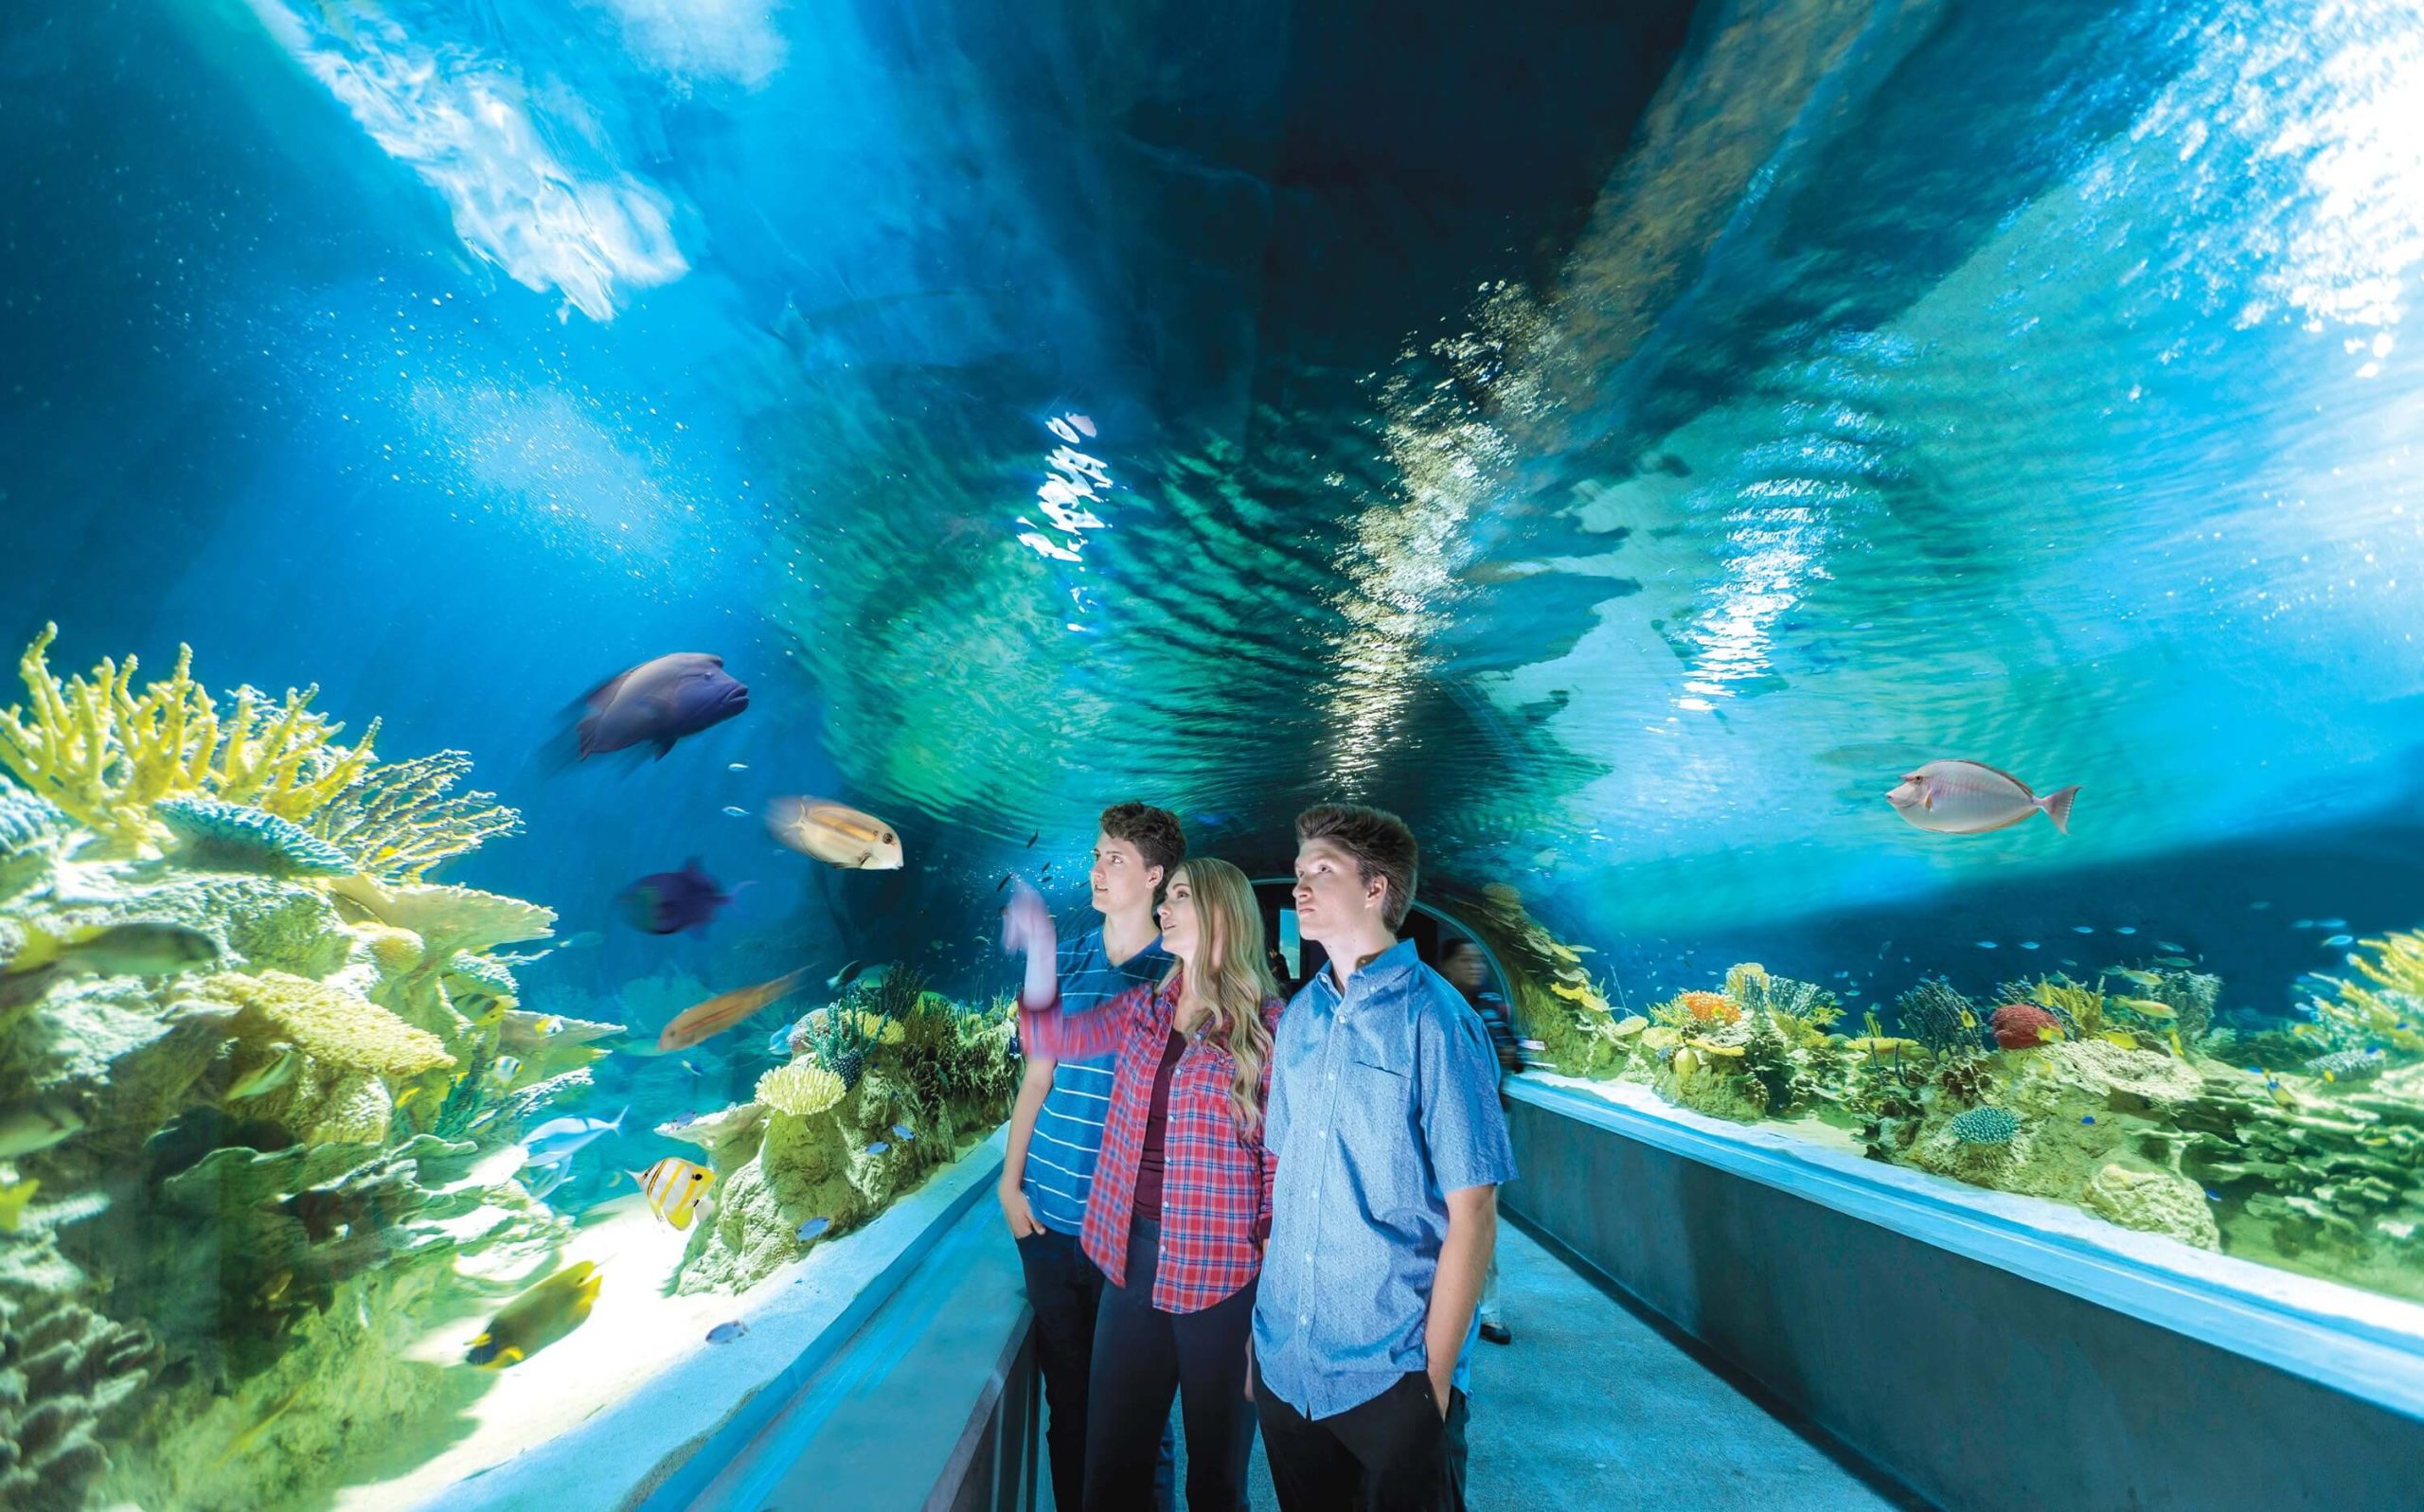 Young visitors enjoy the aquarium in Salt River, a popular activity for friends and families.